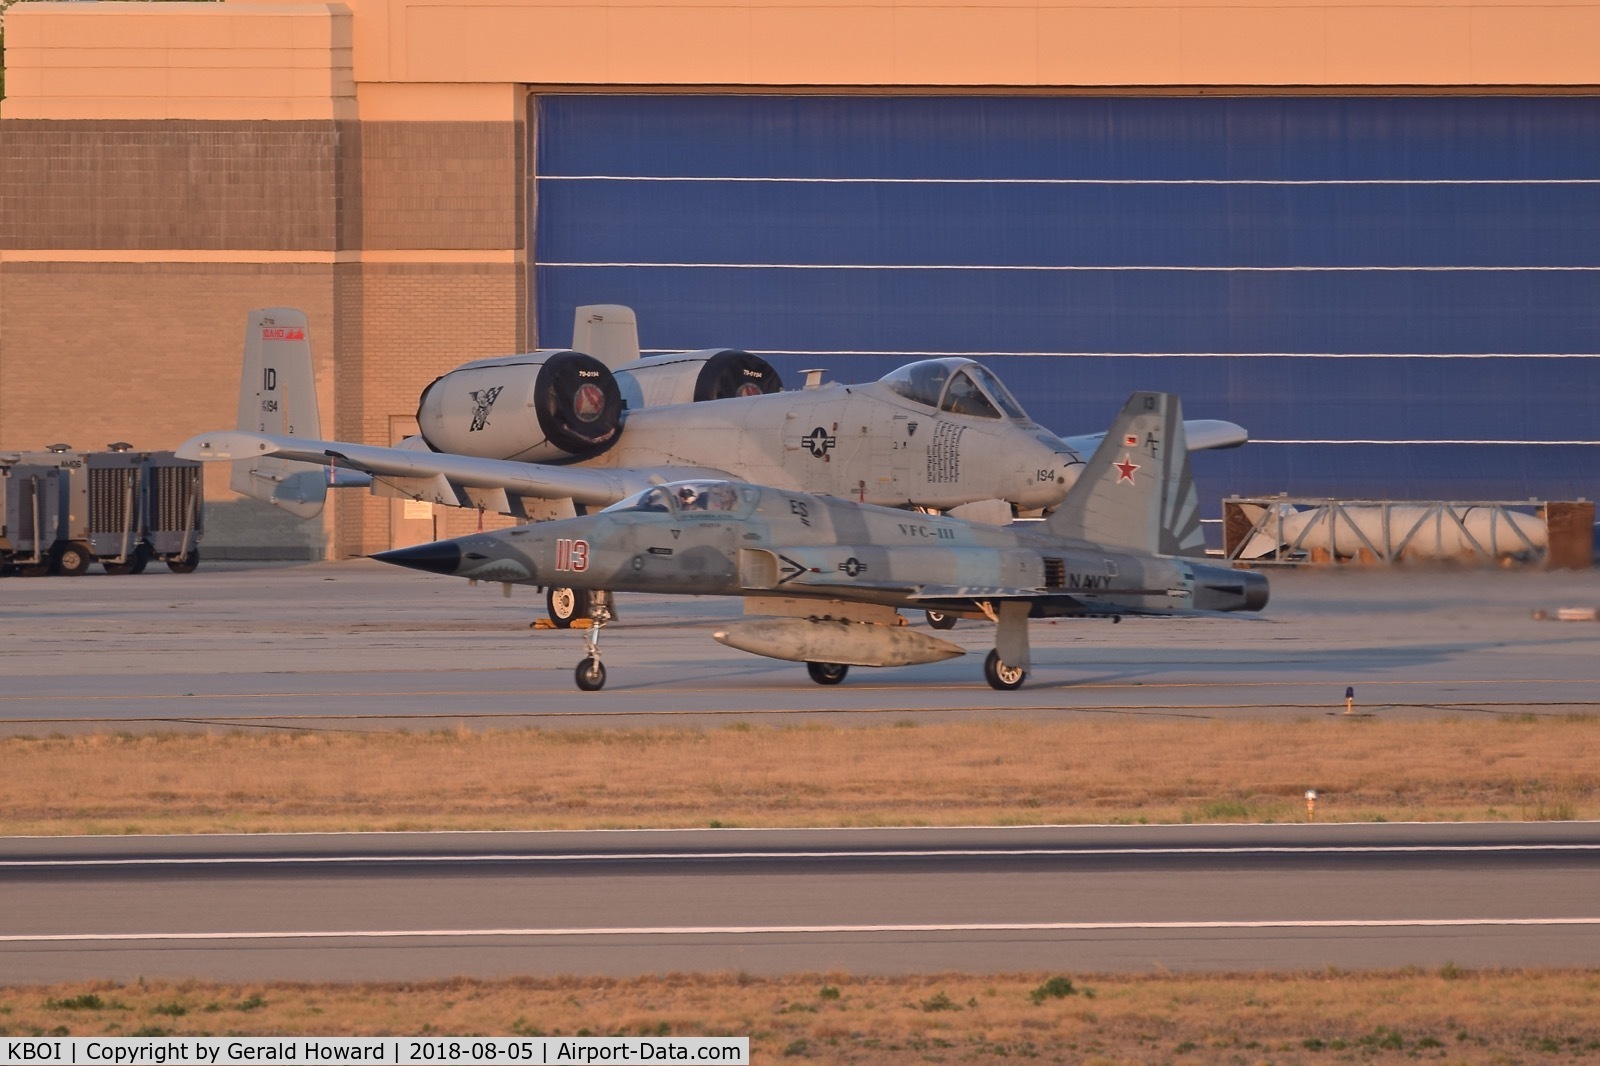 Boise Air Terminal/gowen Fld Airport (BOI) - Navy F-5N taxiing on Bravo in front of A-10C of the Idaho ANG.